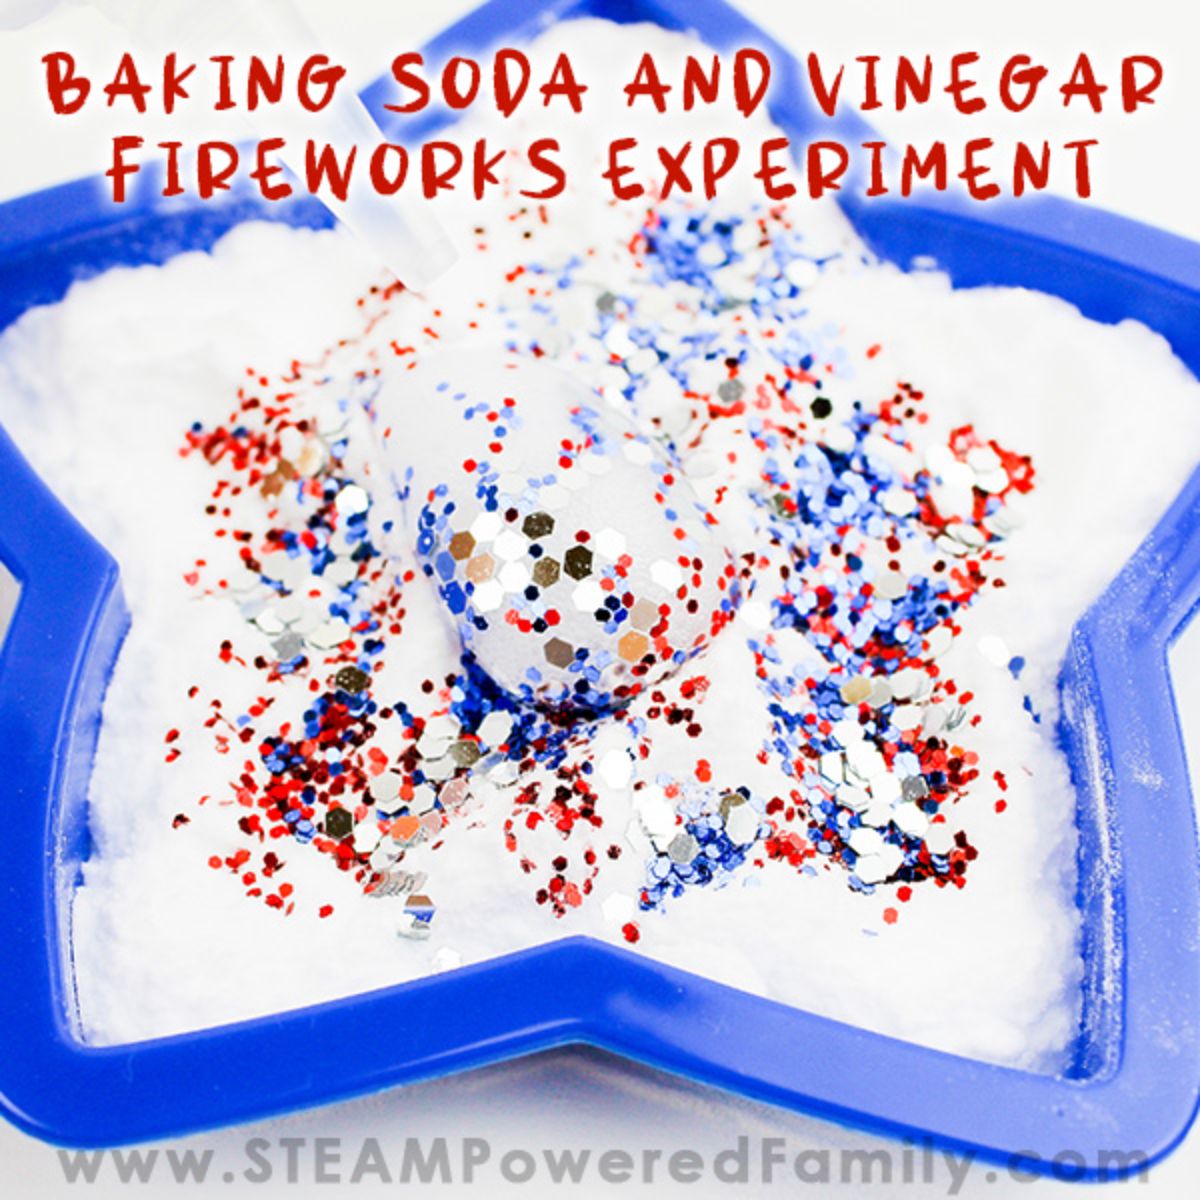 the text reads "Baking soda and vinegar fireworks experiment" the image is of a blue plastic star mold filled with baking soda and glitter